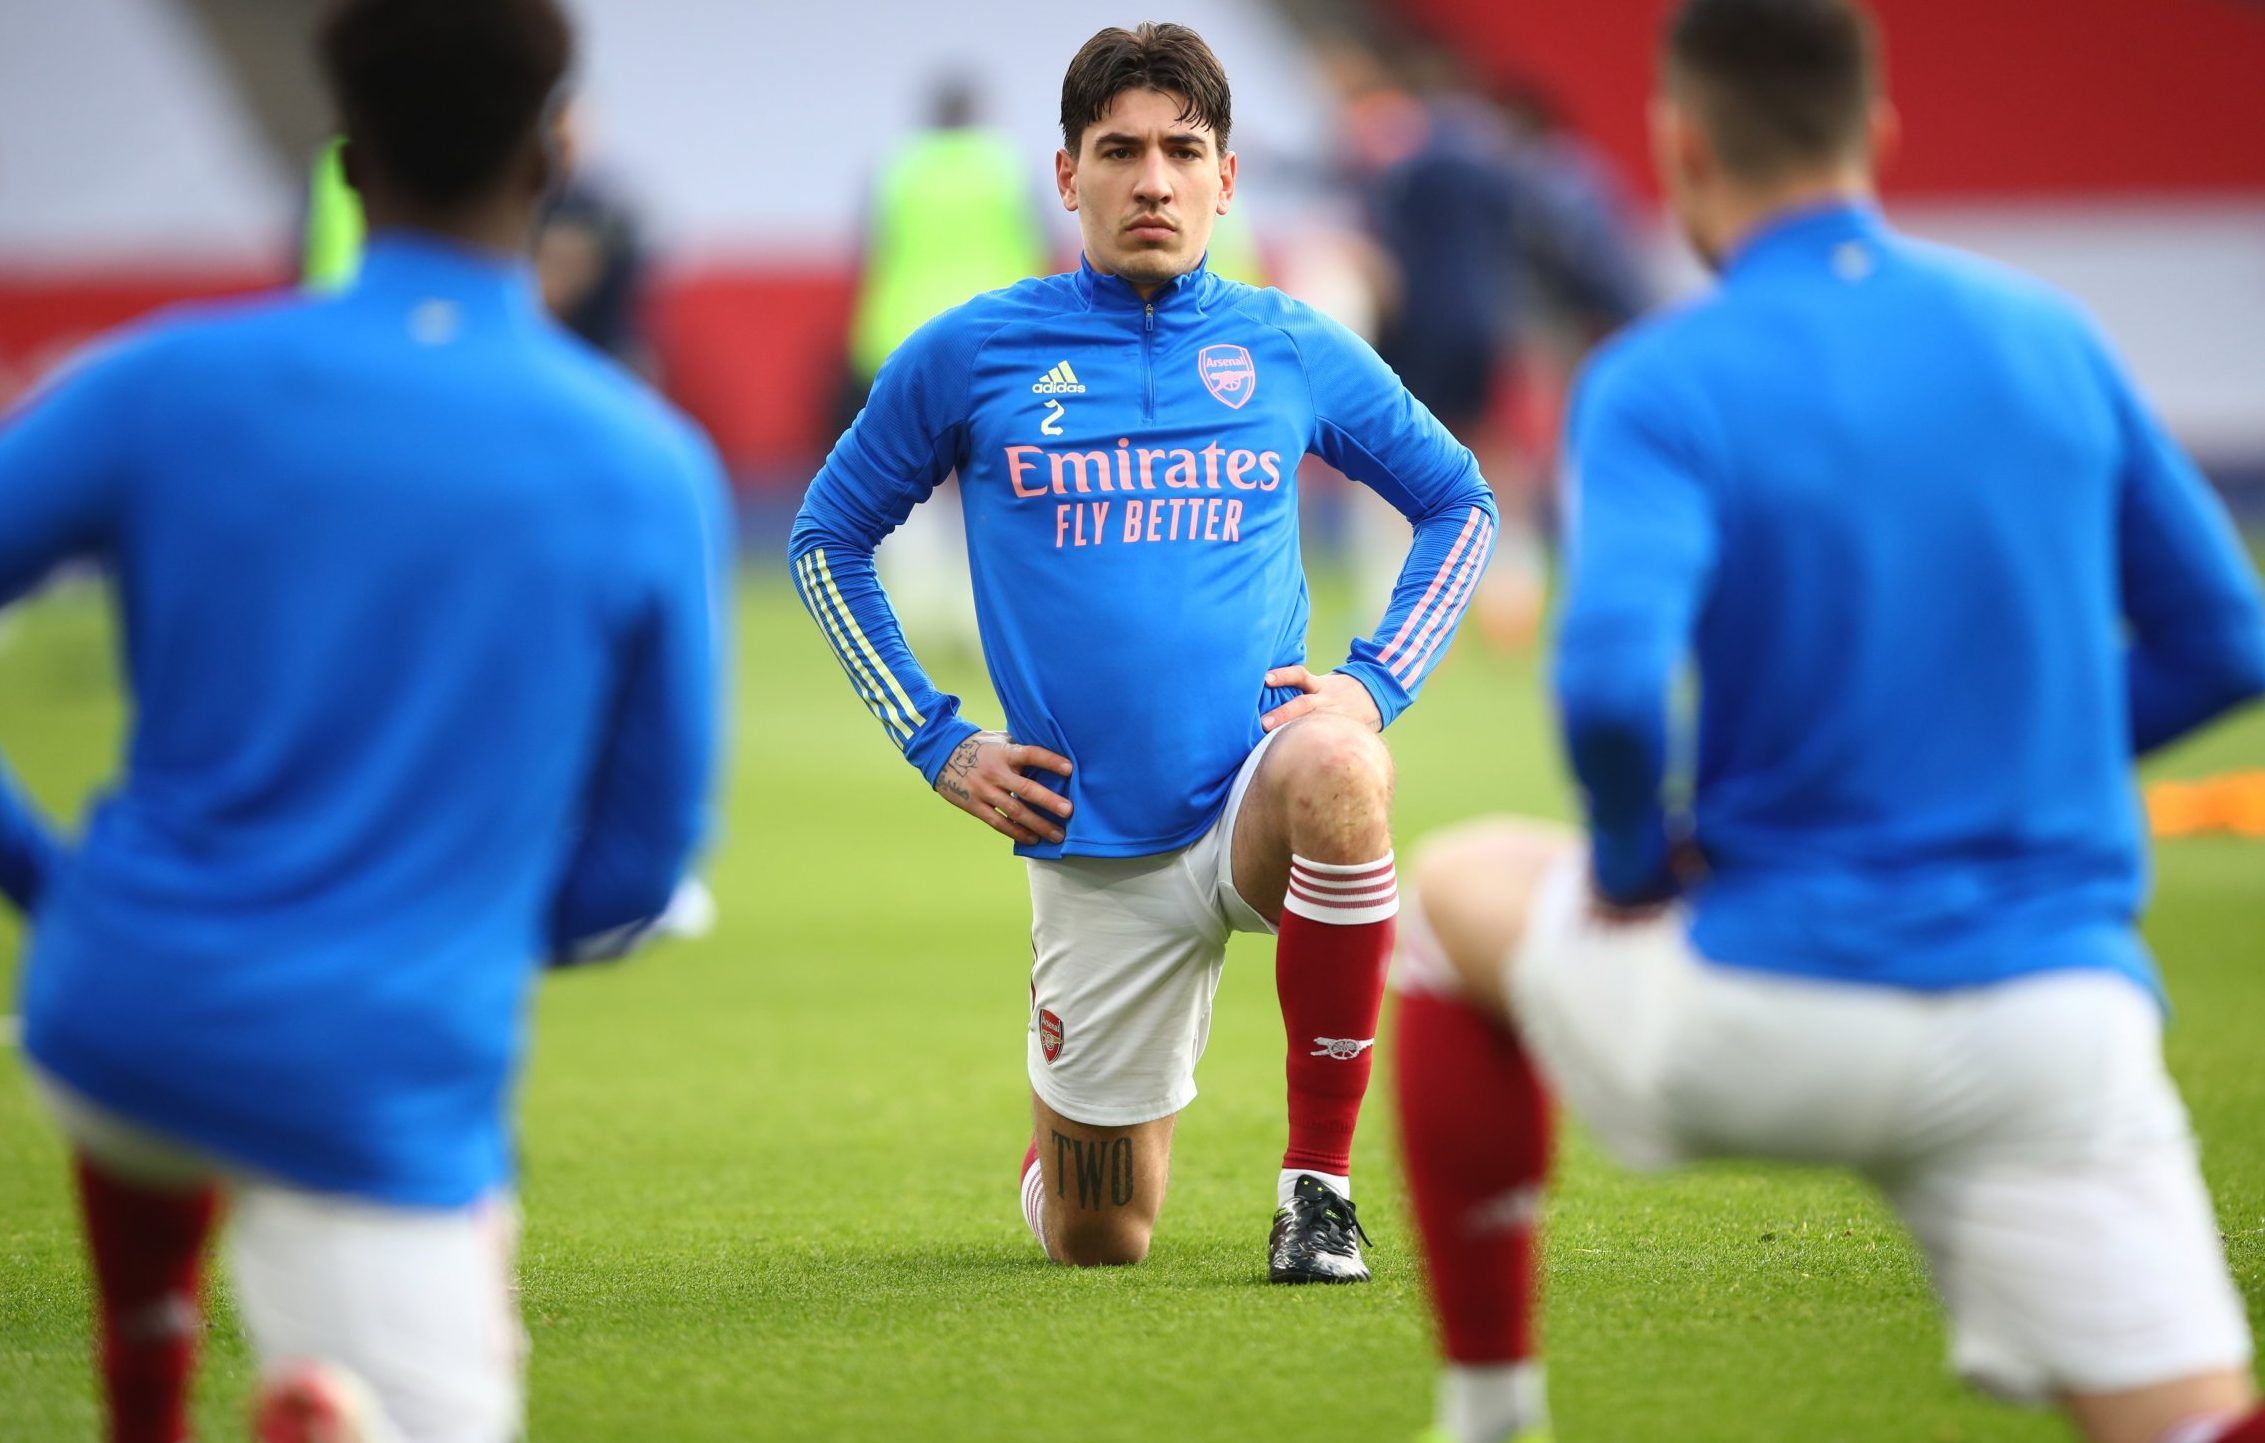 Arsenal right-back Hector Bellerin stretches during warm-up before Mnachester City clash at the Emirates Stadium